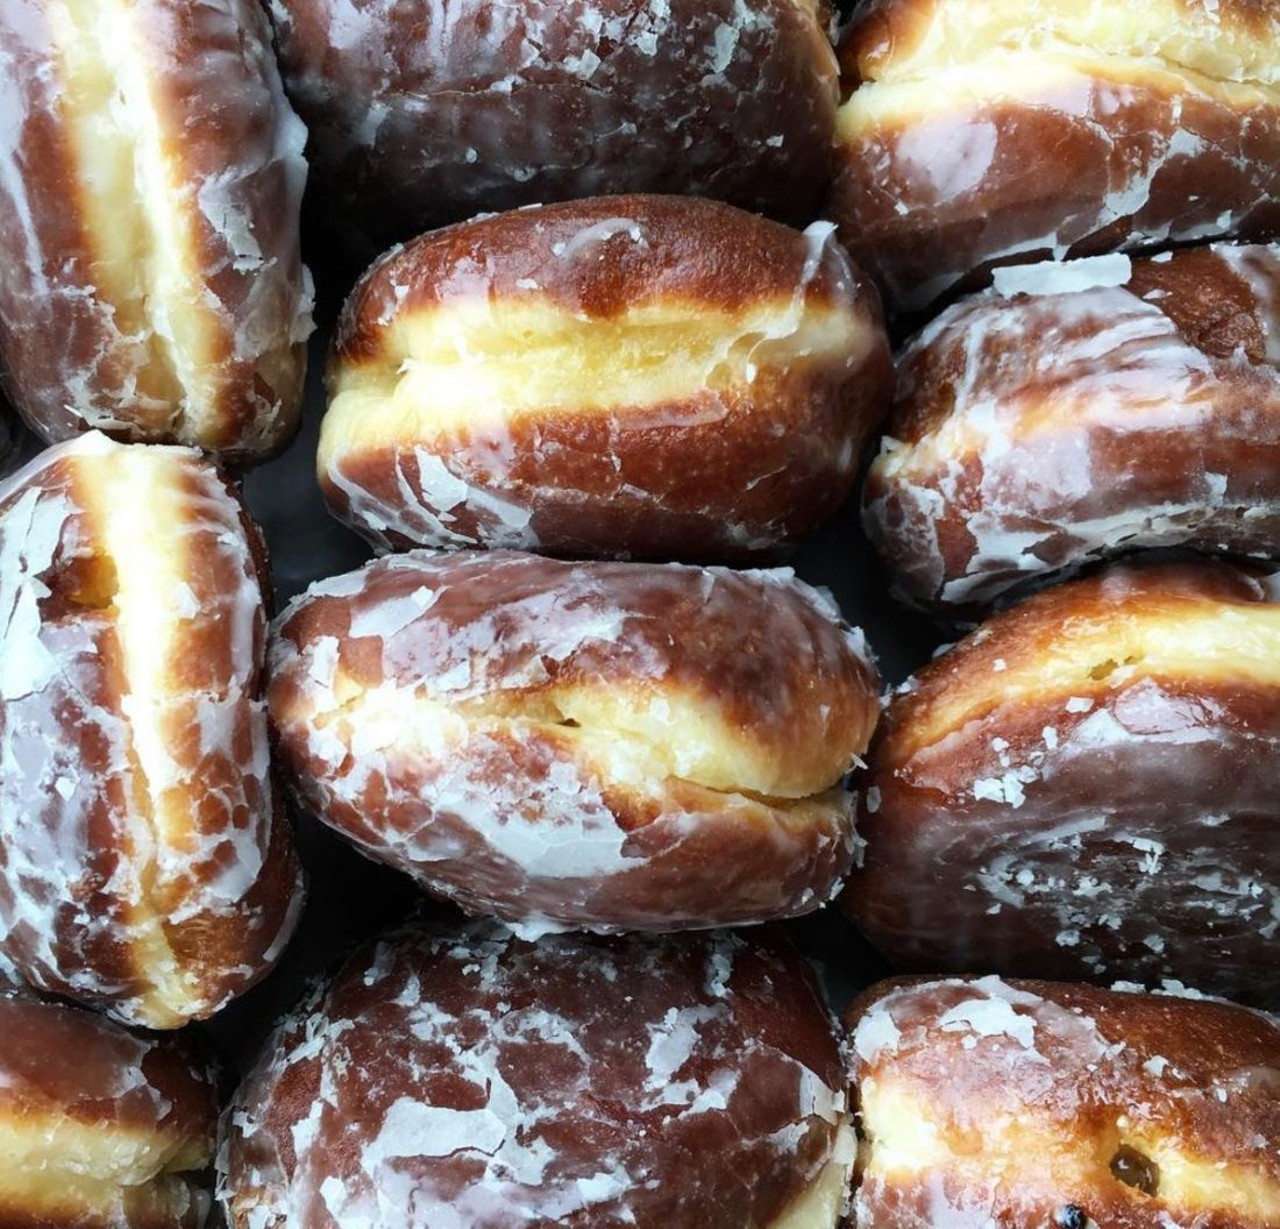 Dimo's Deli and Donuts
Don&#146;t expect to be mollycoddled here &#151; the service is endearingly crusty, but the donuts are delicious. 
2030 W Stadium Blvd.; Ann Arbor; 734-662-7944. Photo via Instagram user tierneyisaac.